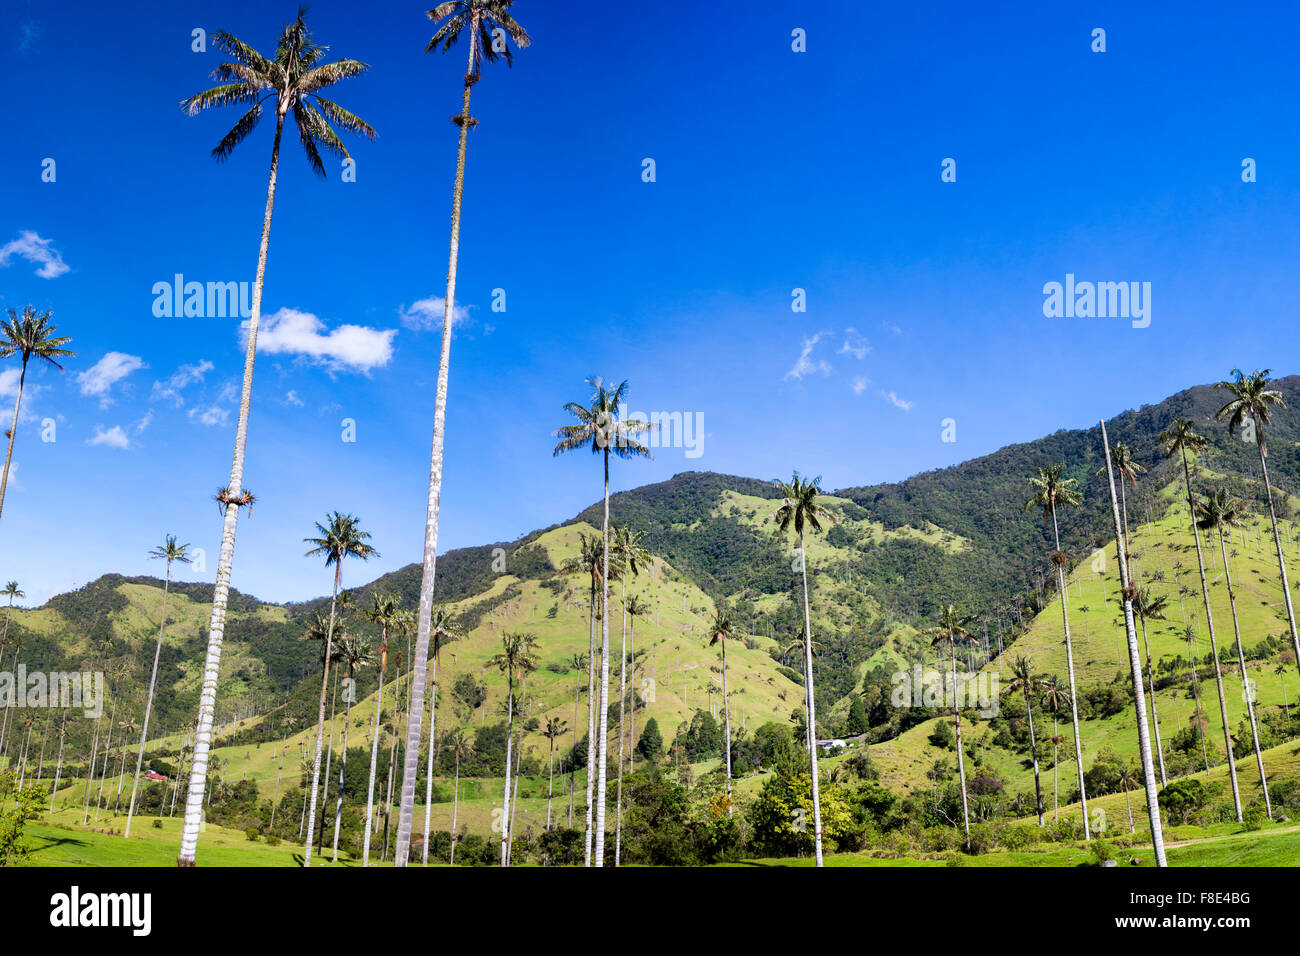 Cocora valley near Salento with enchanting landscape of pines and eucalyptus towered over by the famous giant wax palms Stock Photo